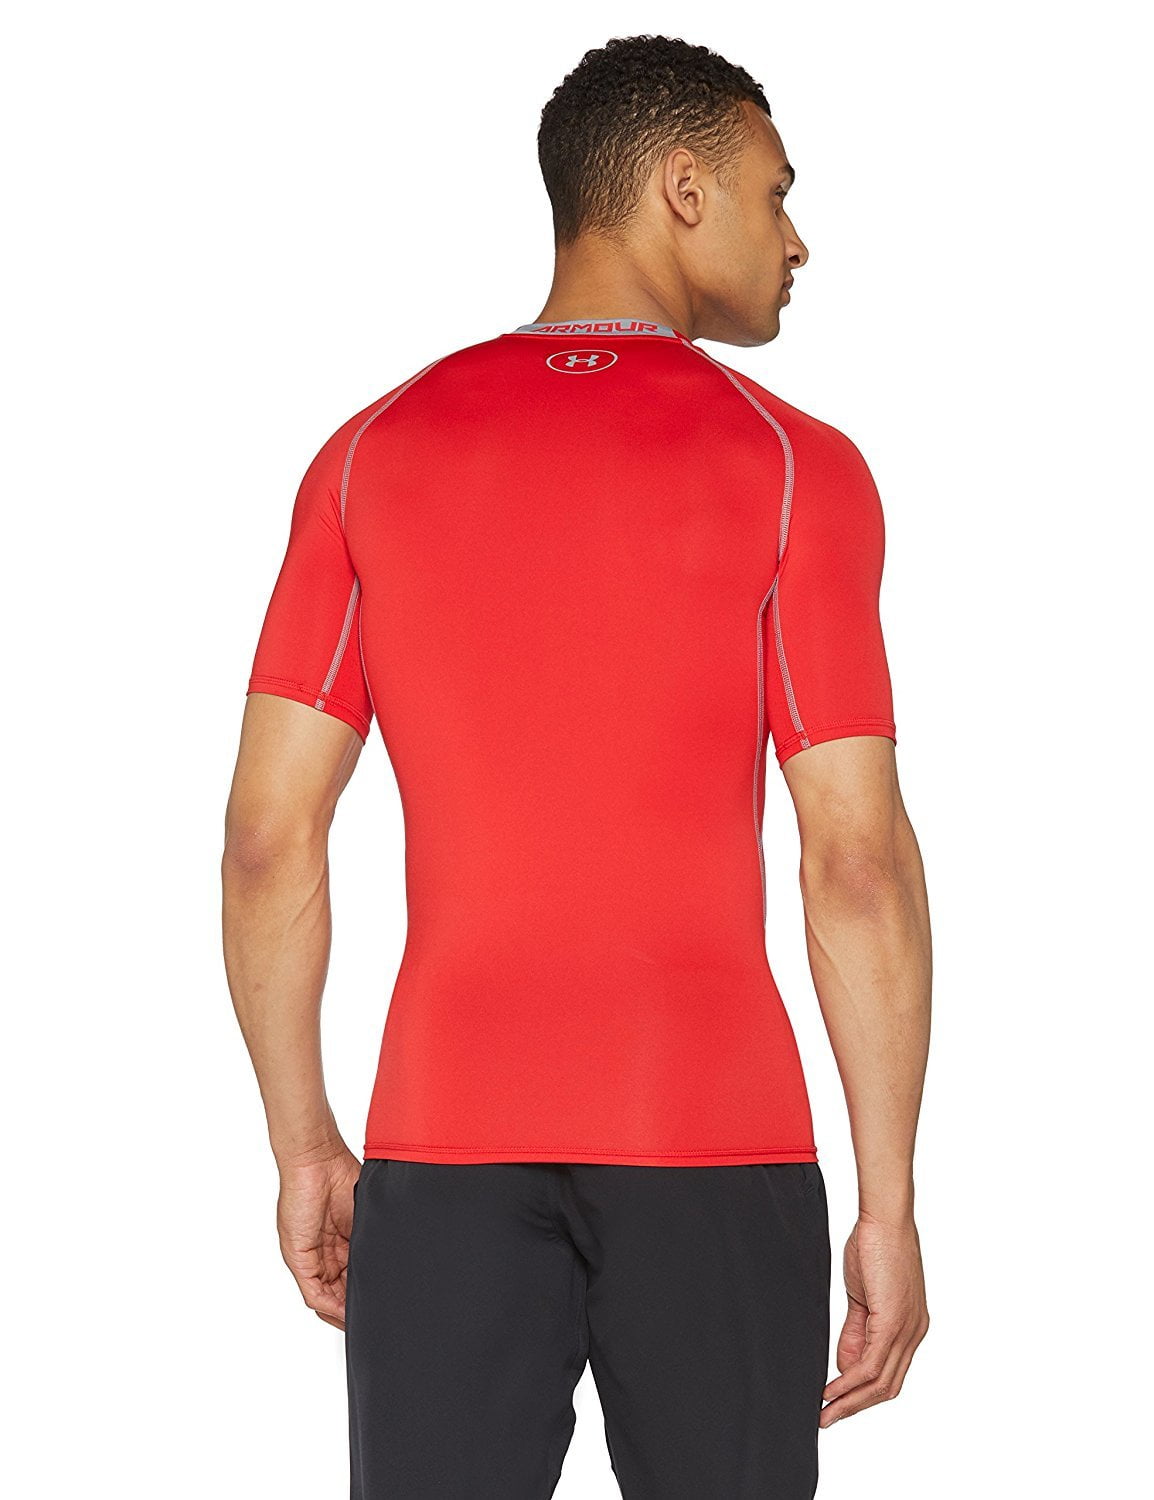  Under Armour Men's UA HeatGear® Armour Short Sleeve Compression  Shirt : Clothing, Shoes & Jewelry